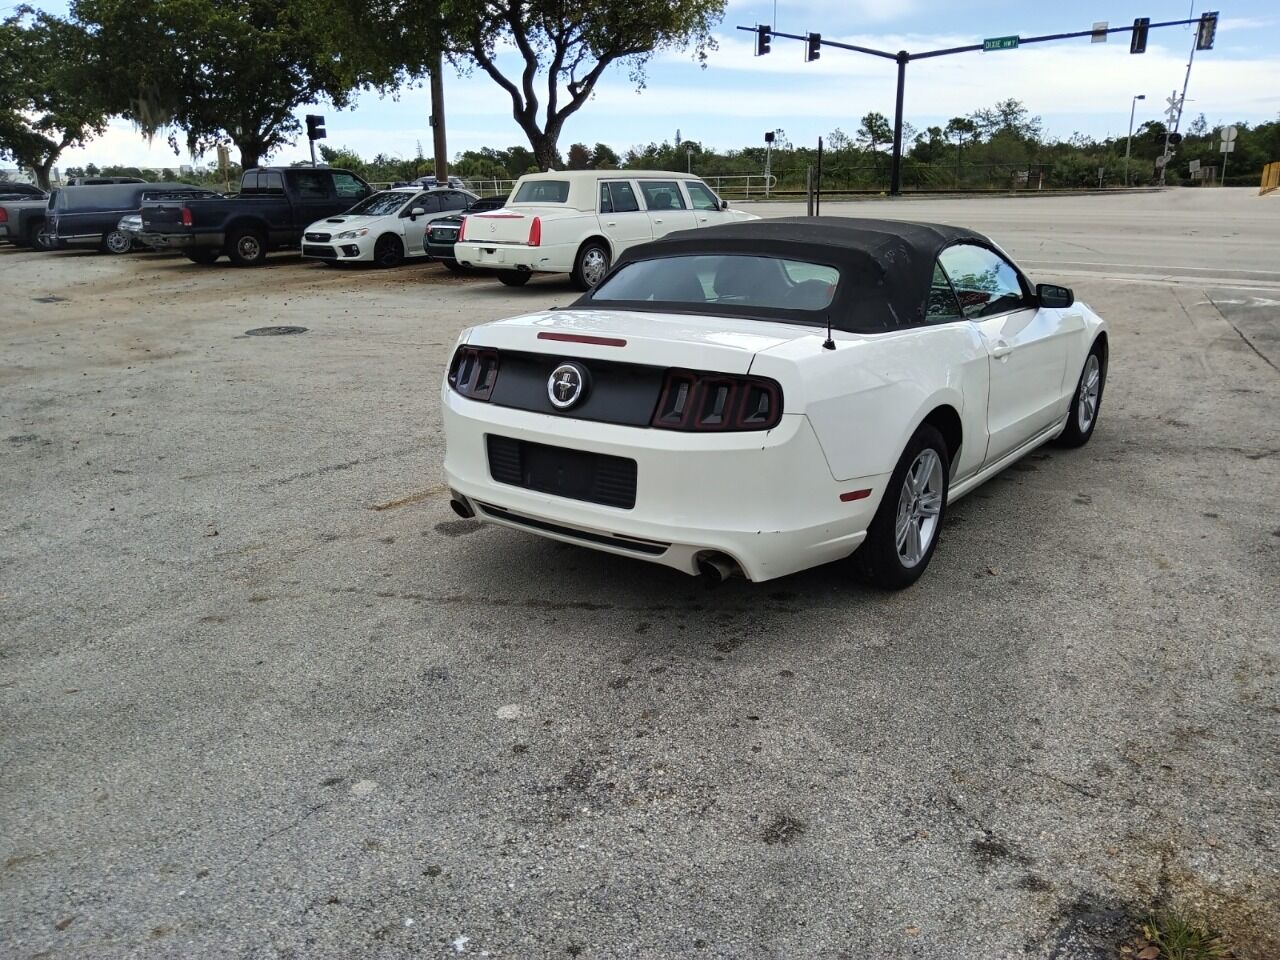 2013 Ford Mustang Convertible - $7,950